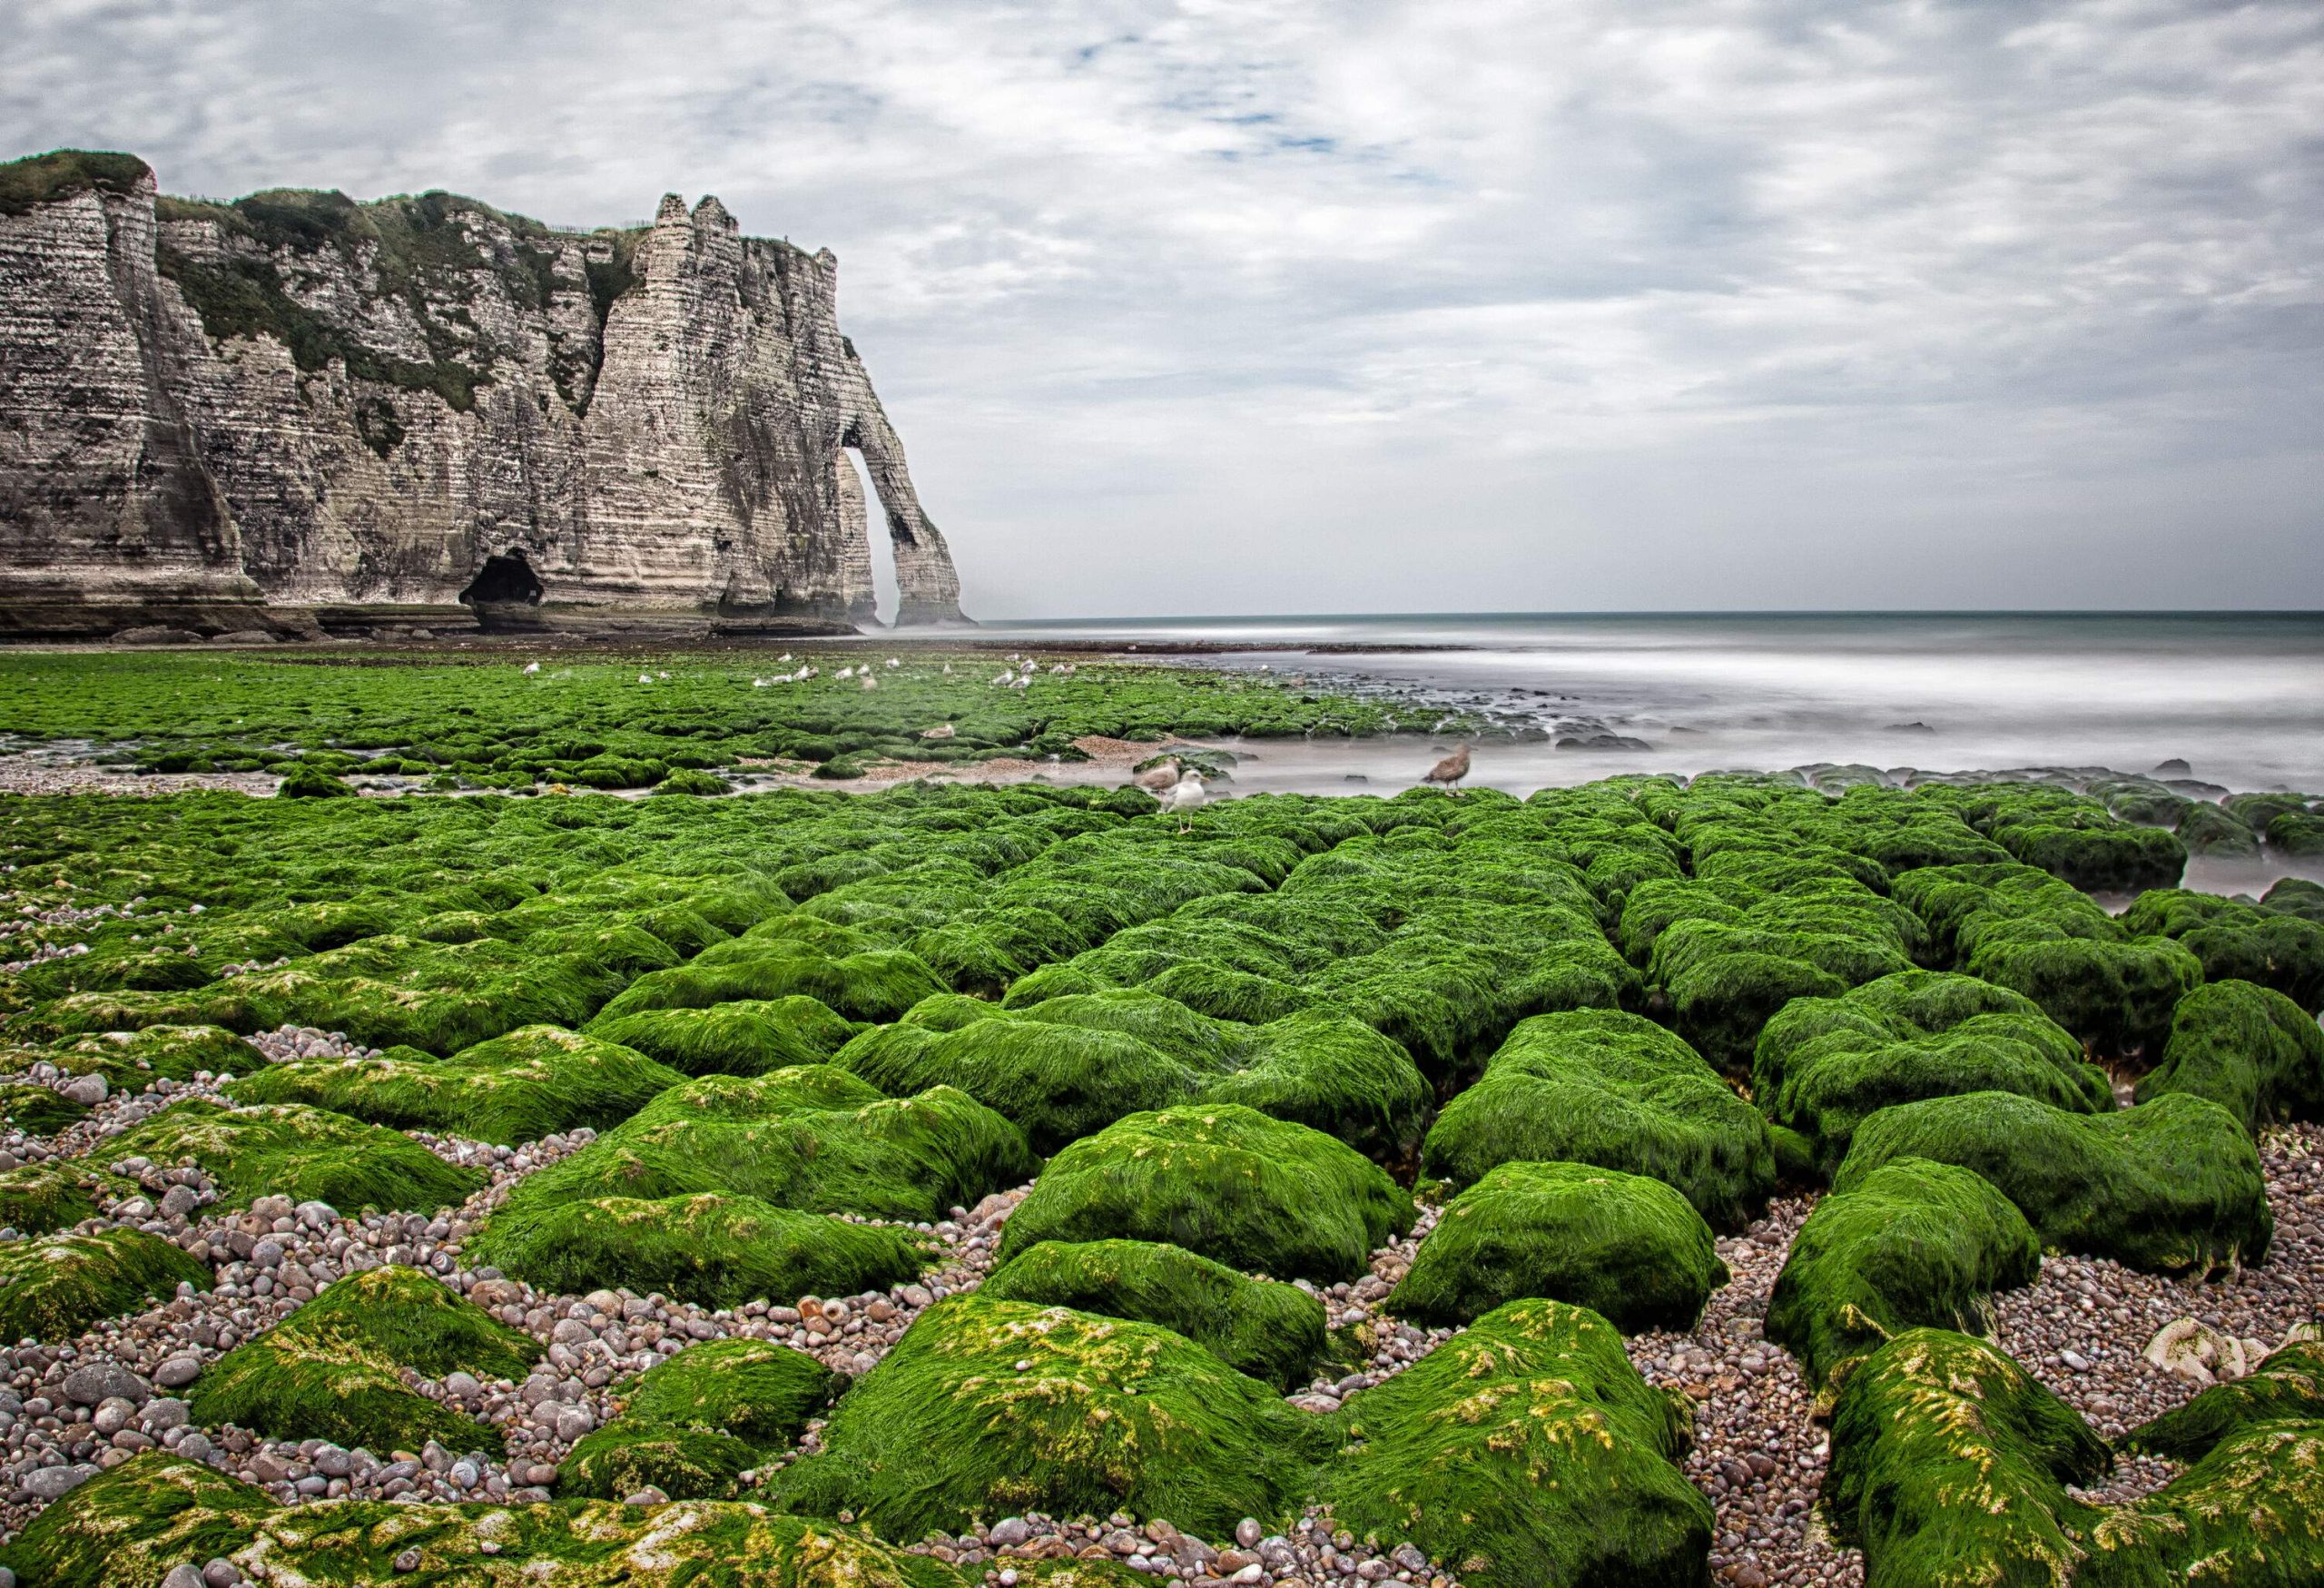 A rocky shore covered in moss overlooks the cliff with a natural rock arch against the cloudy sky.